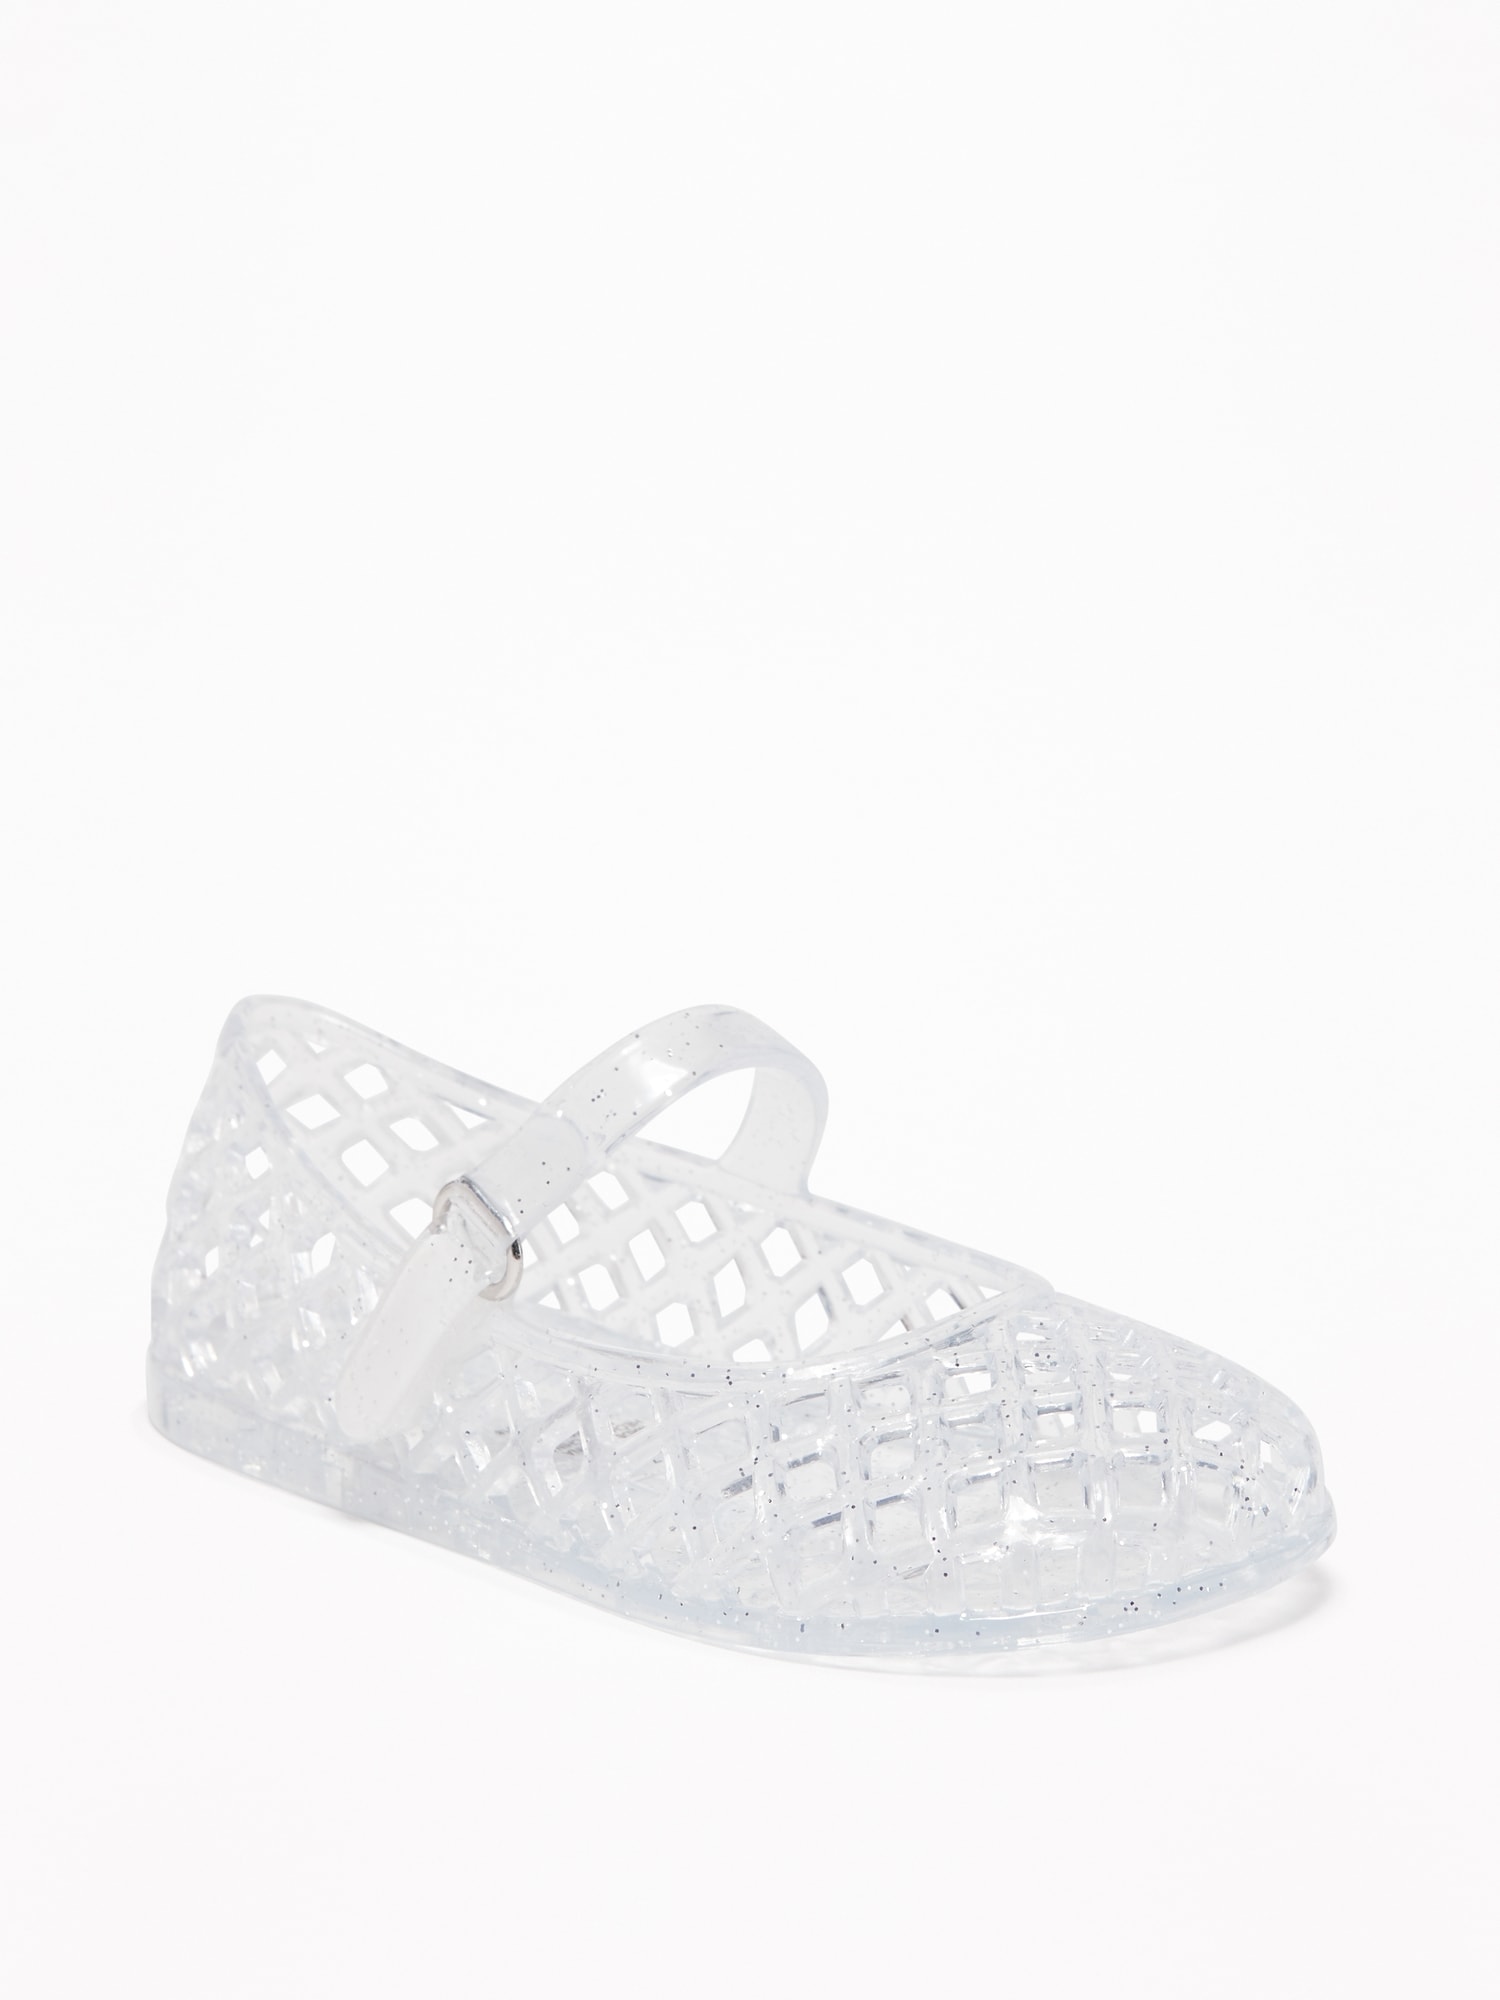 old navy baby jelly shoes